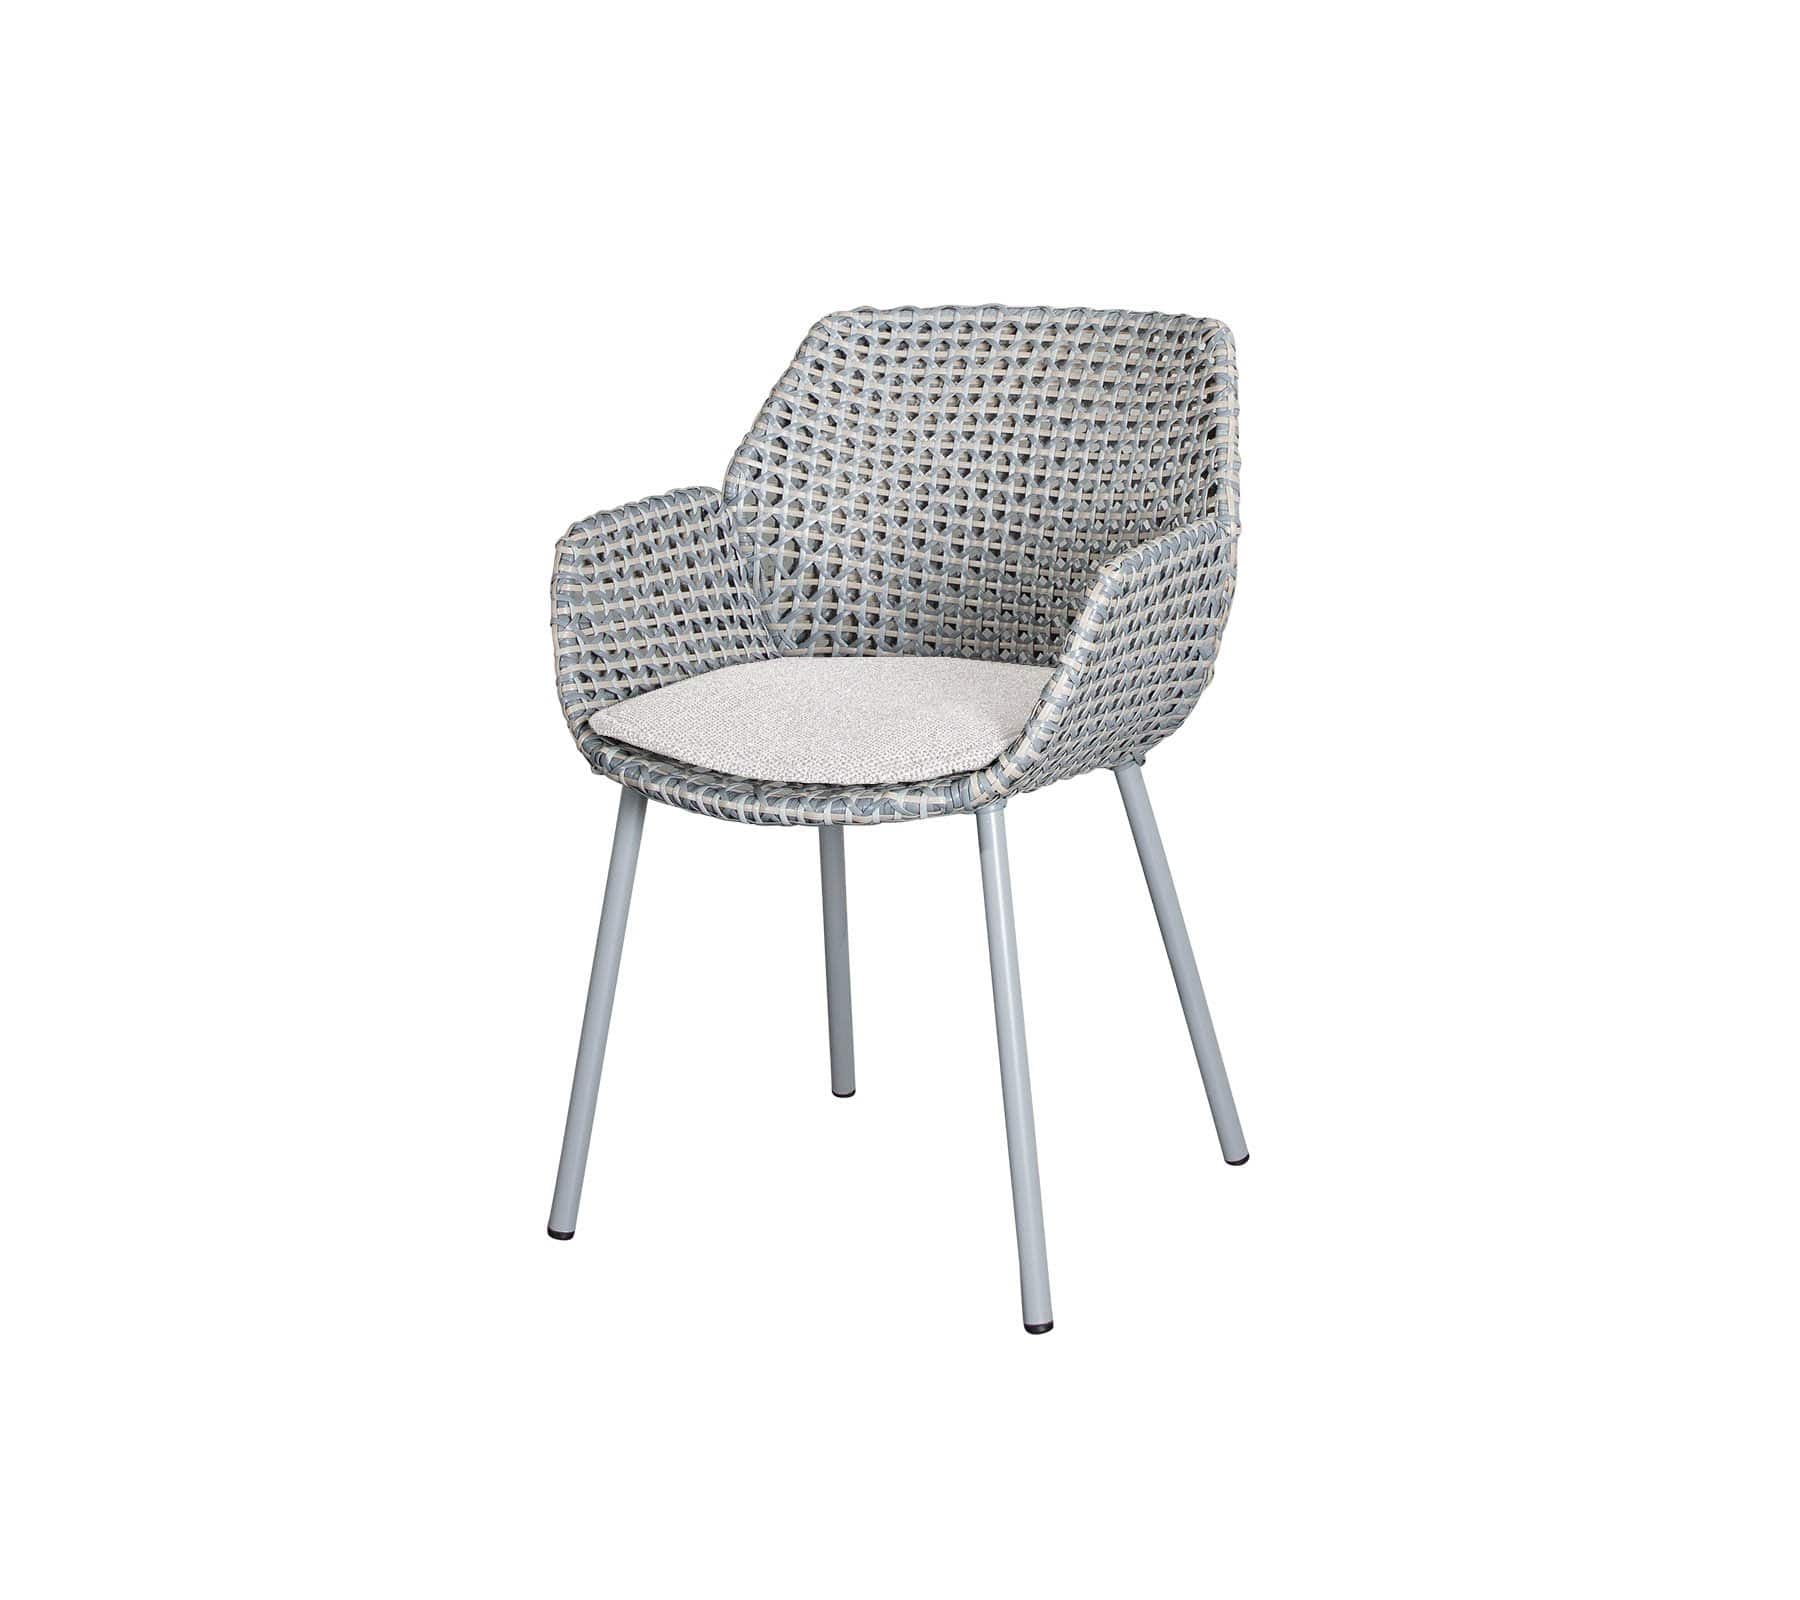 Boxhill's Vibe light grey outdoor armchair with white cushion on white background